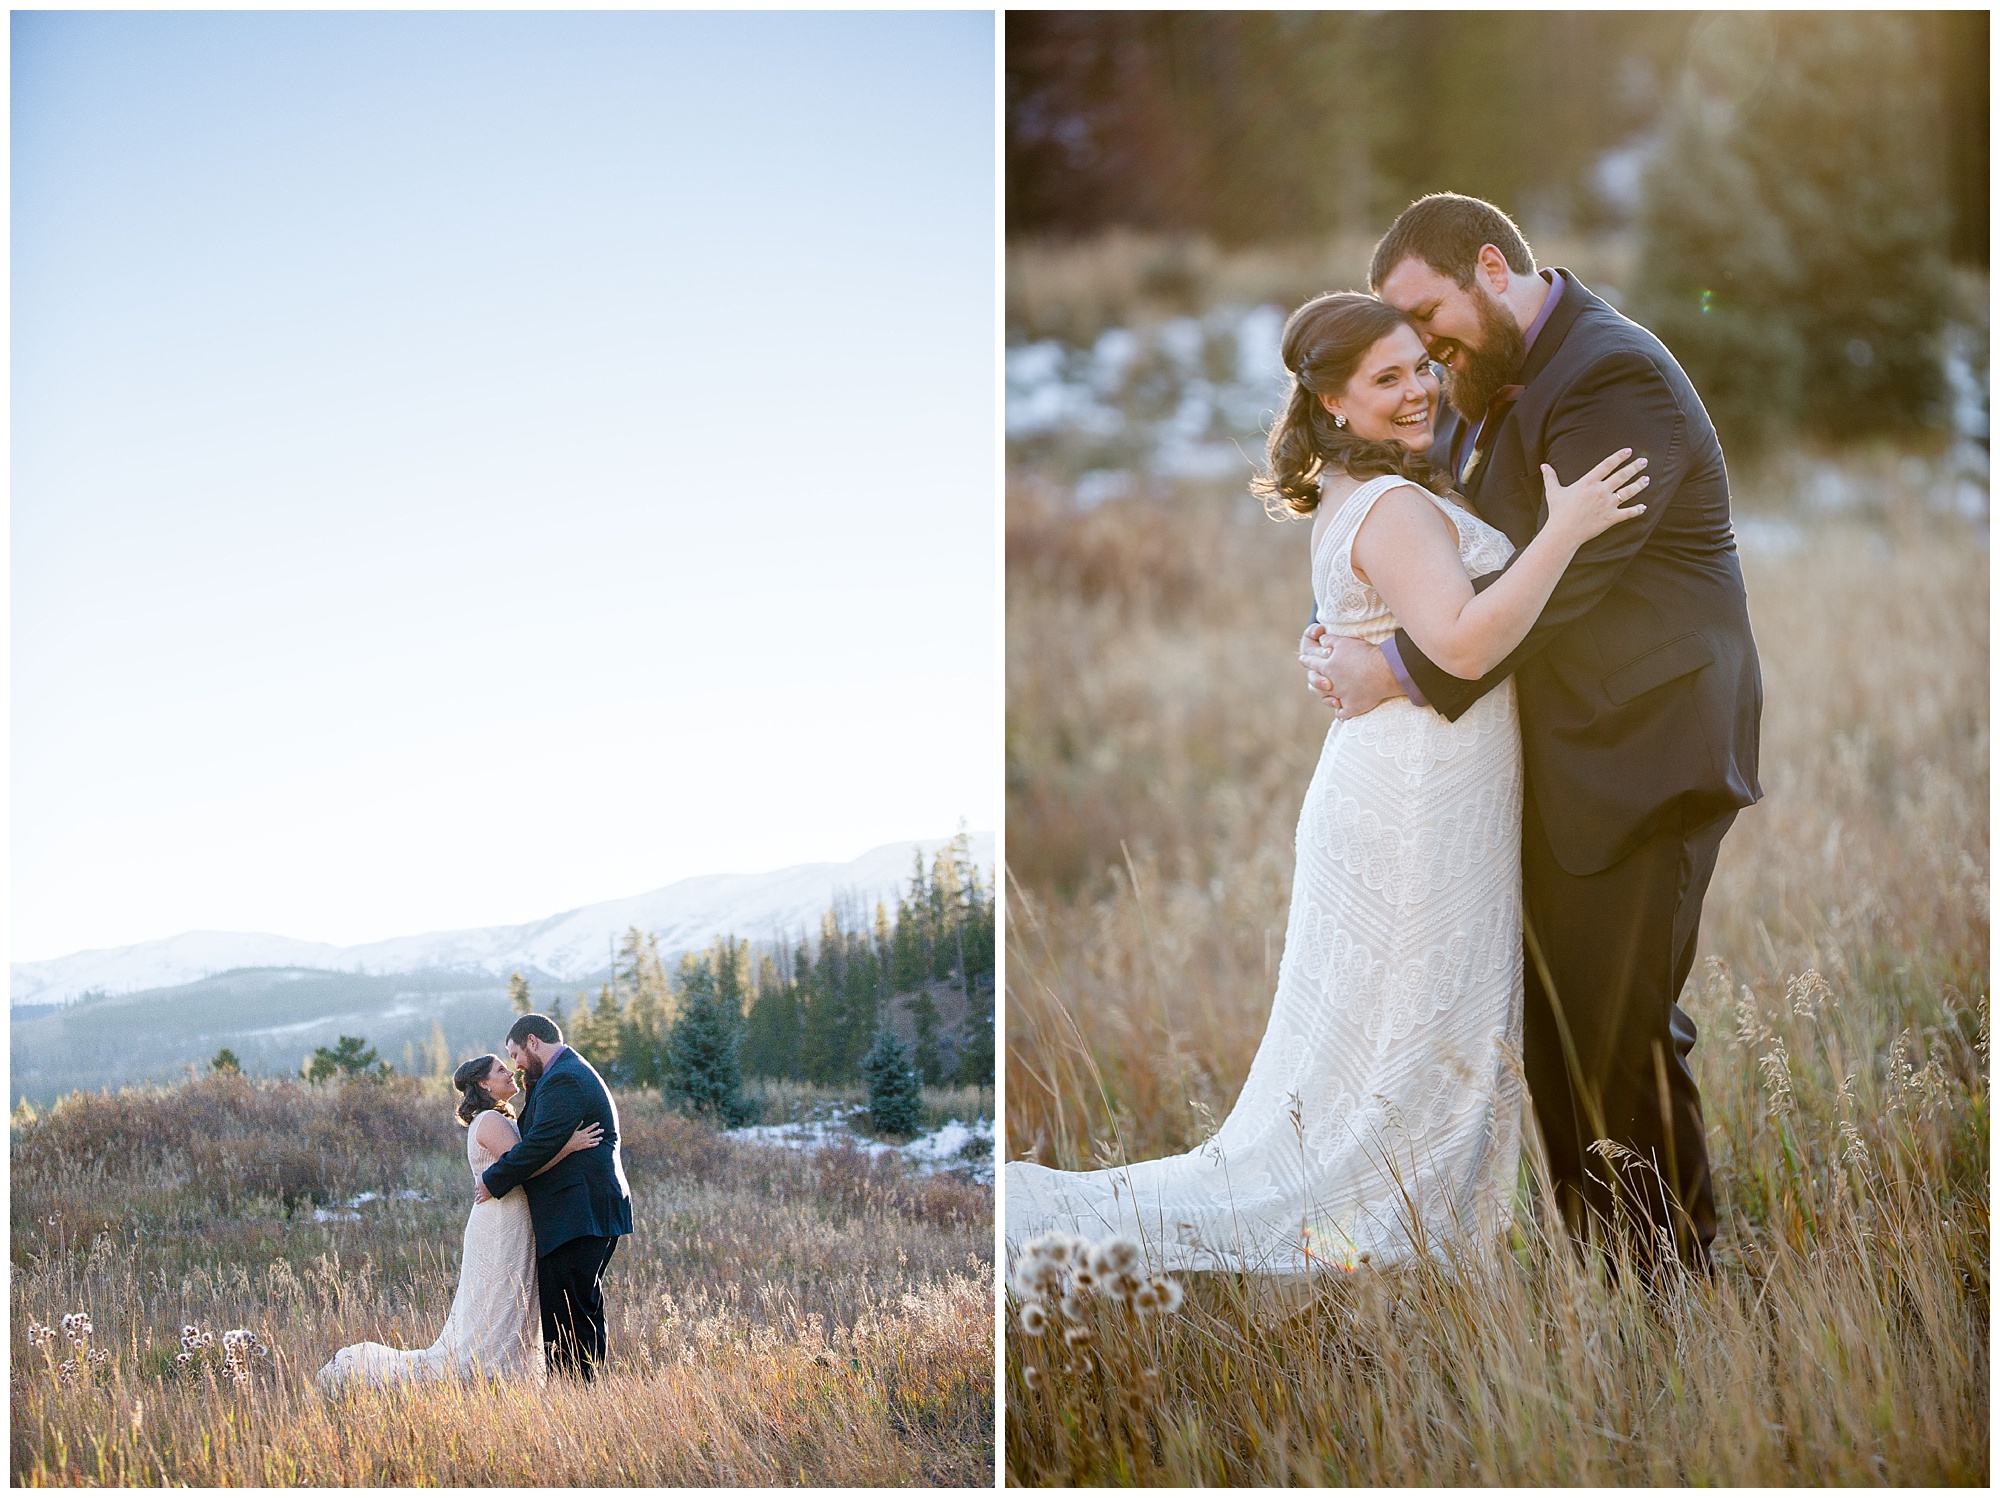 Portraits of the wedding couple at their Breckenridge mountain elopement.